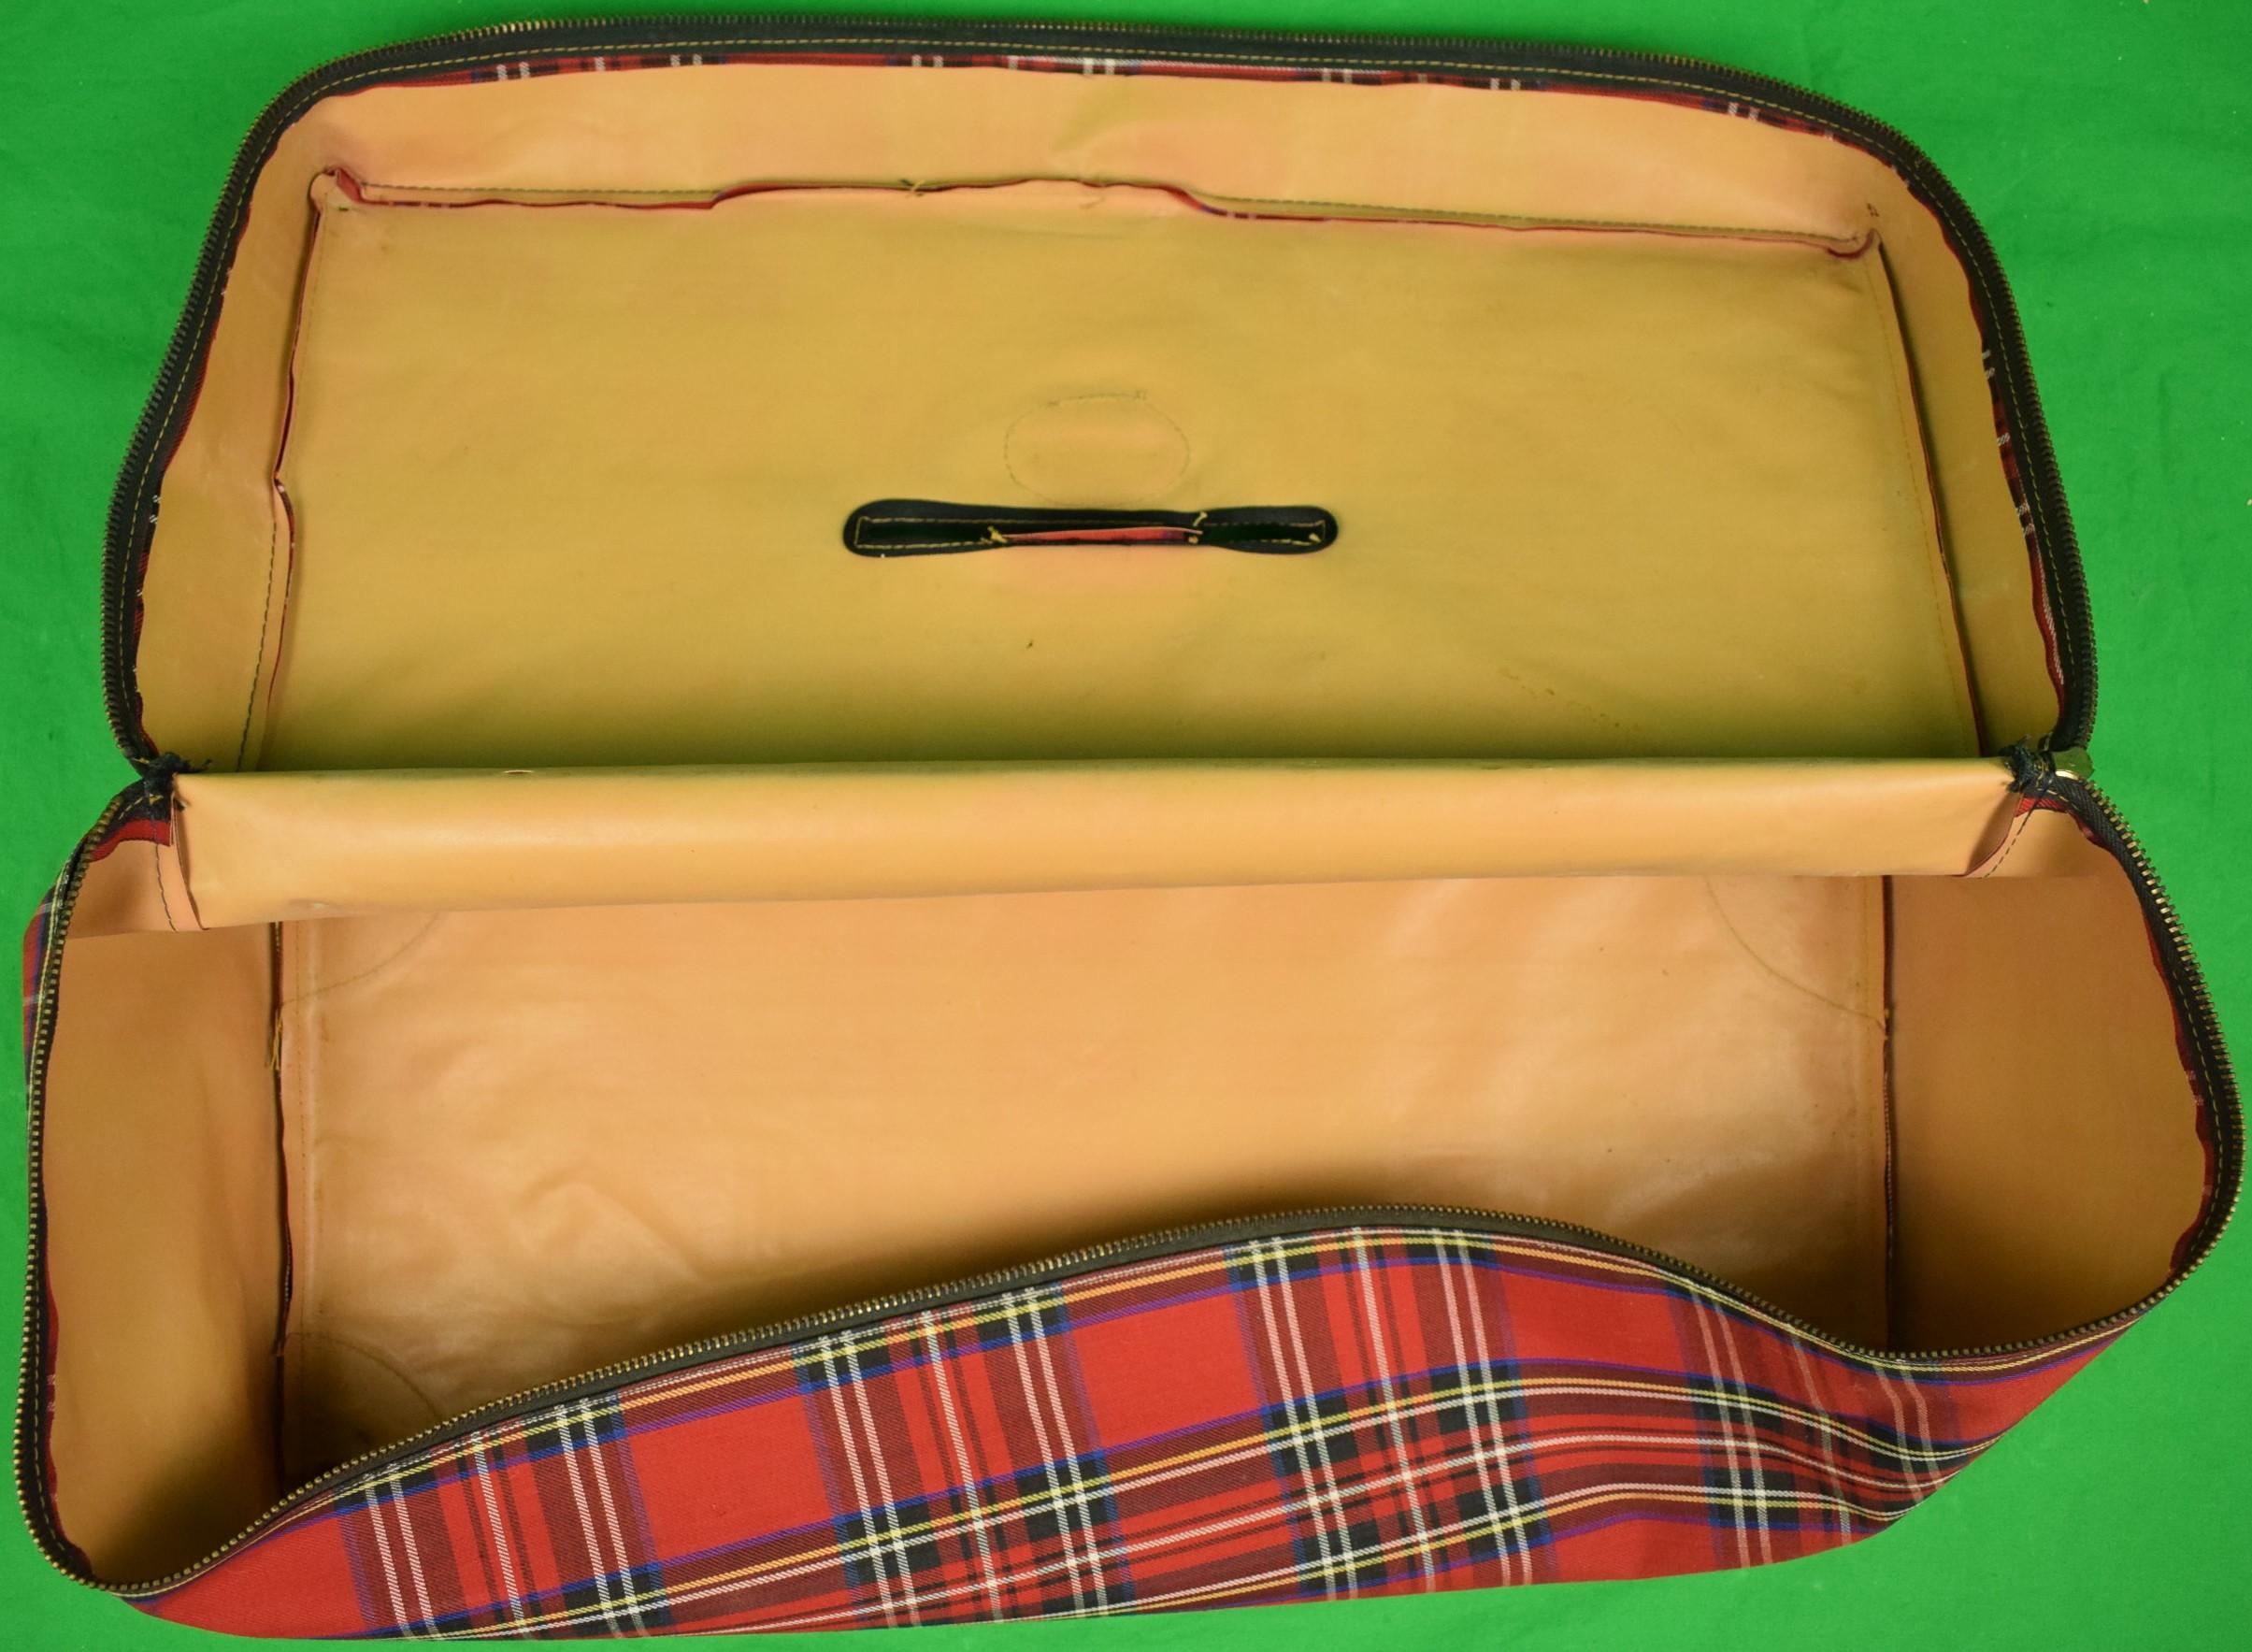 Abercrombie & Fitch Deluxe Mahogany Tackle Box w/ Royal Stewart Tartan Cover For Sale 8